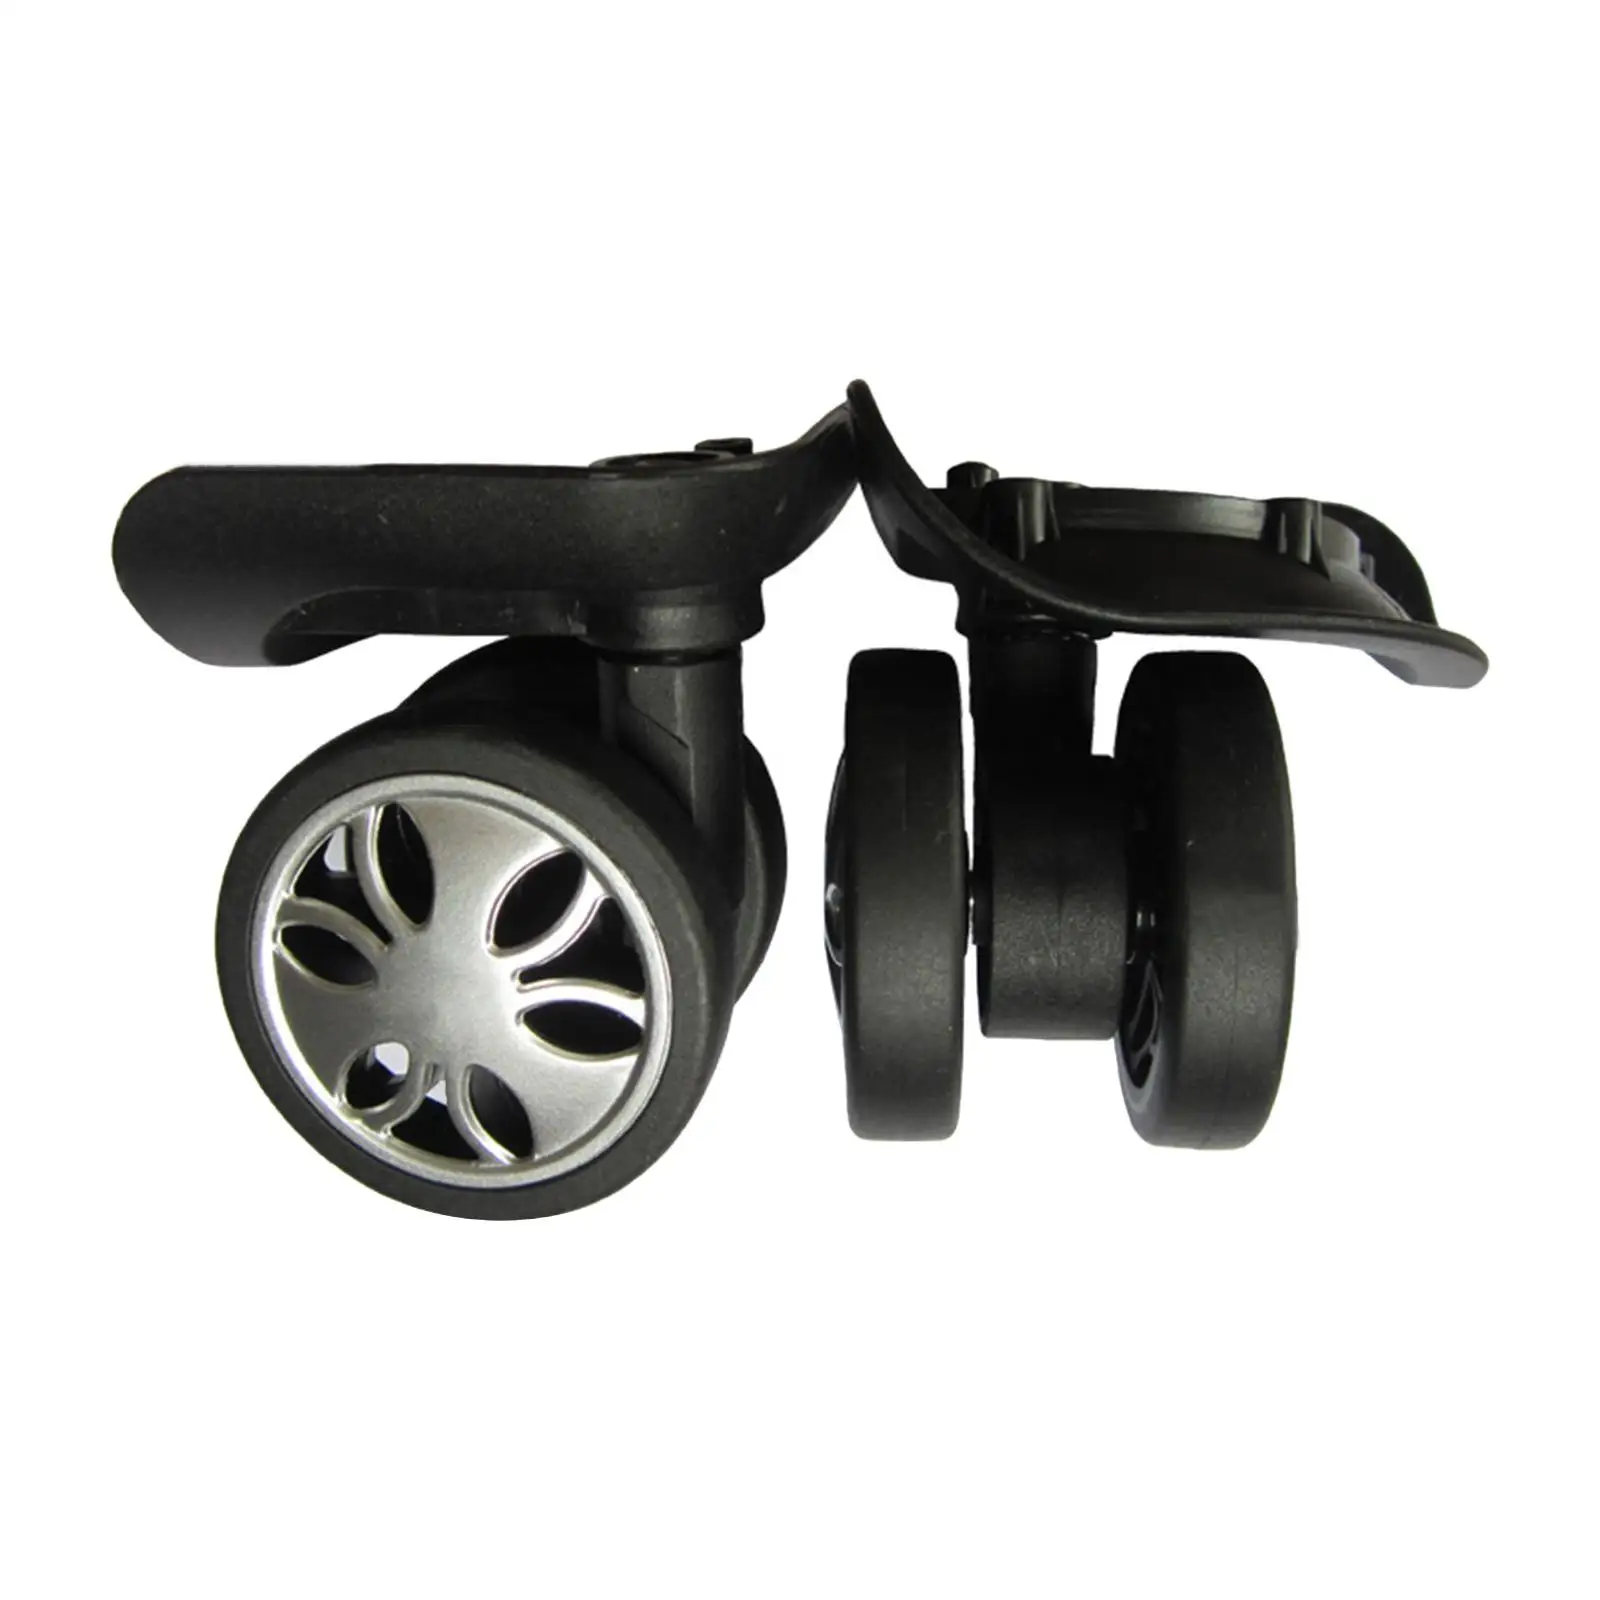 

2Pcs Luggage Wheels Replacement Universal Quiet 360 Degree Rotation Wear Resistant Suitcase Wheels Swivel Casters for Suitcase